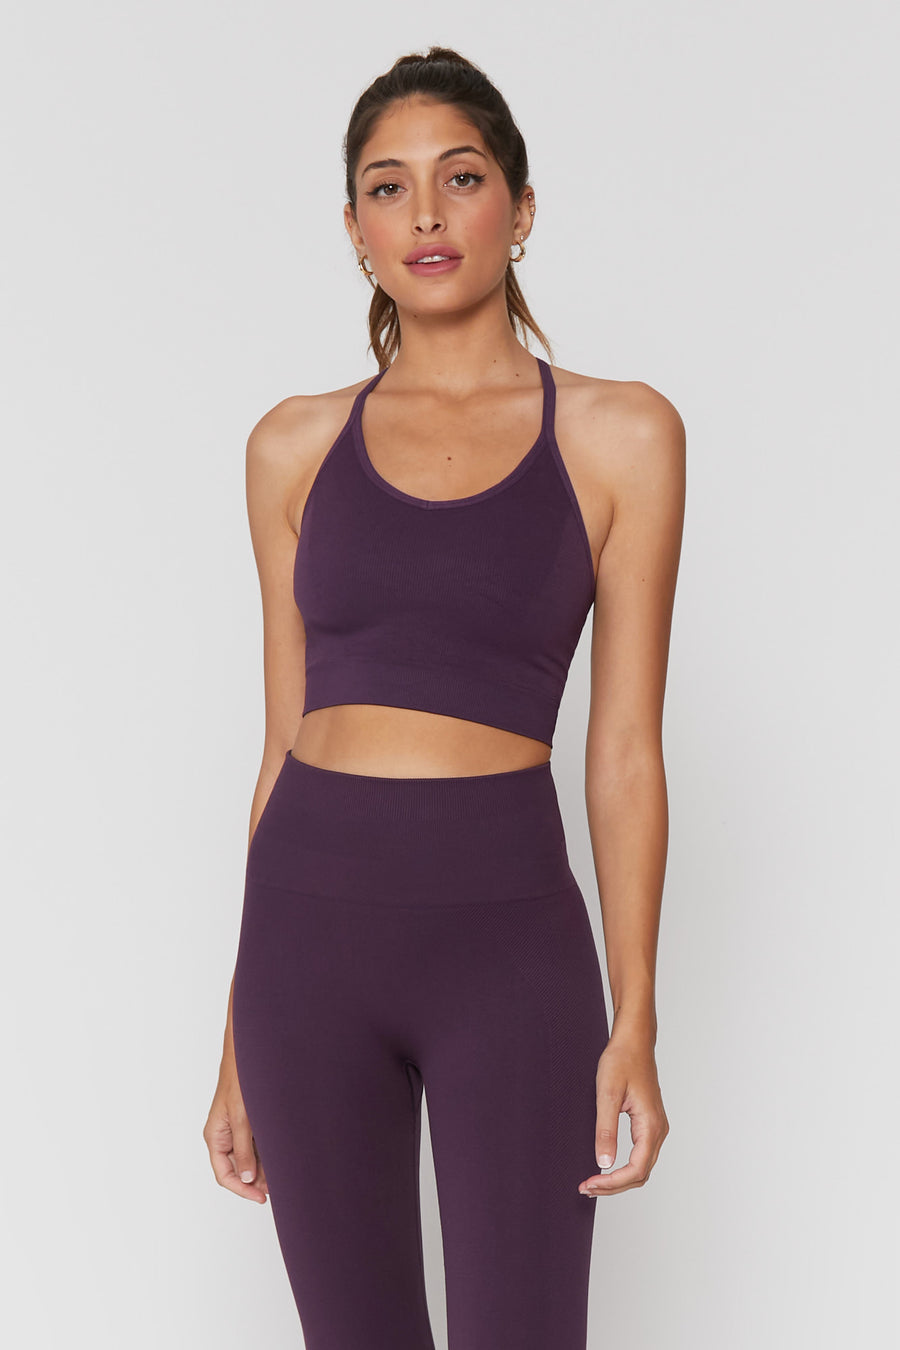 Own your icon status in this seamless Icon T-Back Sports Bra from Spiritual Gangster, and get the support you deserve.